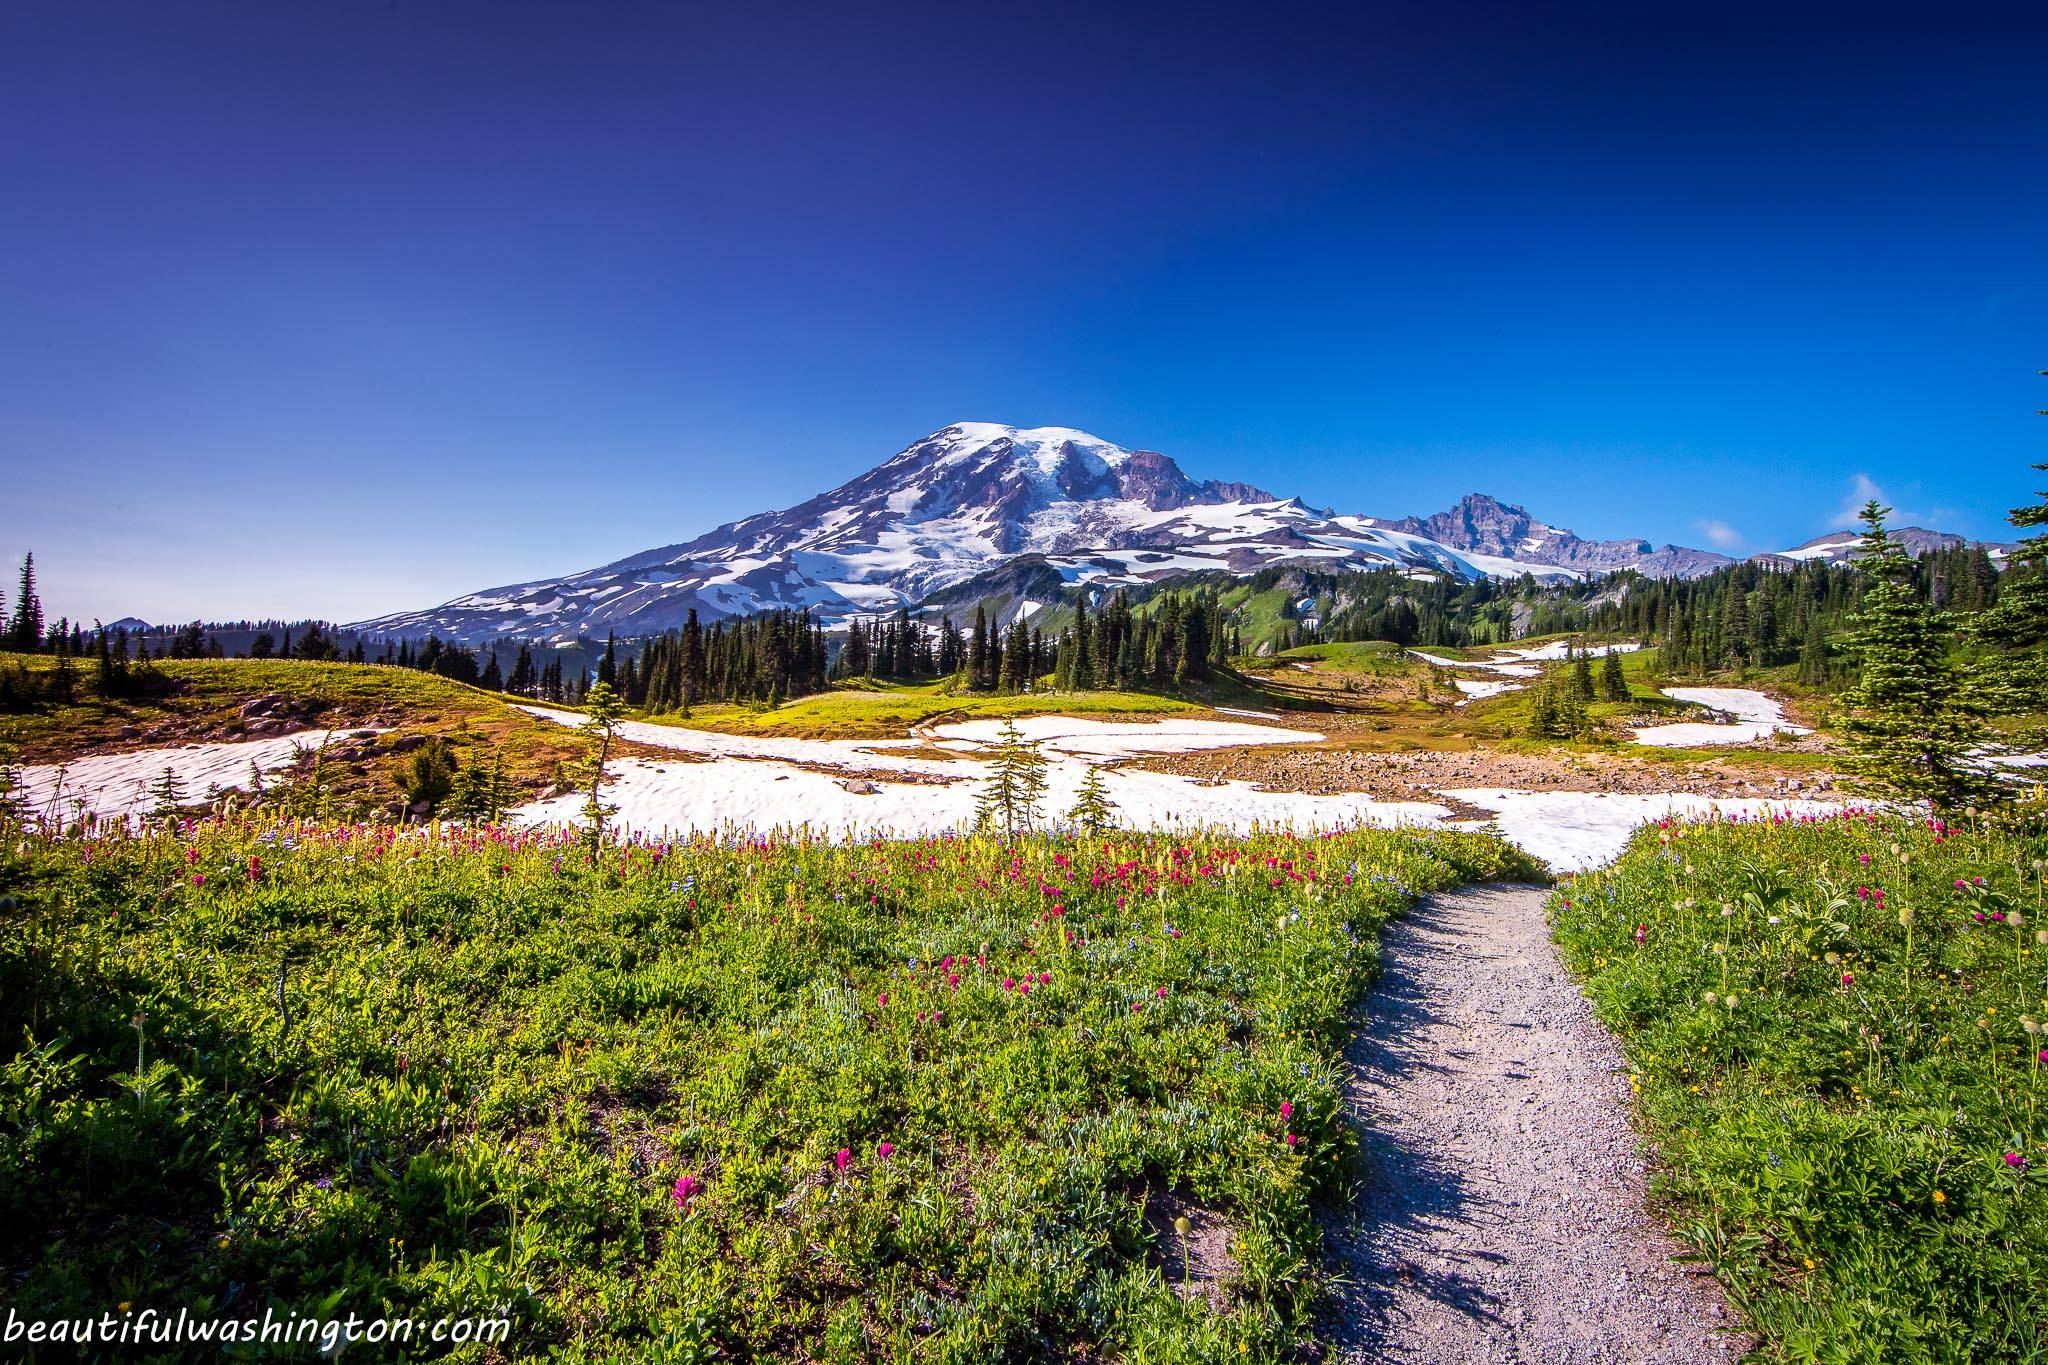 Mount Rainier: Deceptive enchantment of the most prominent Washington State Mountain